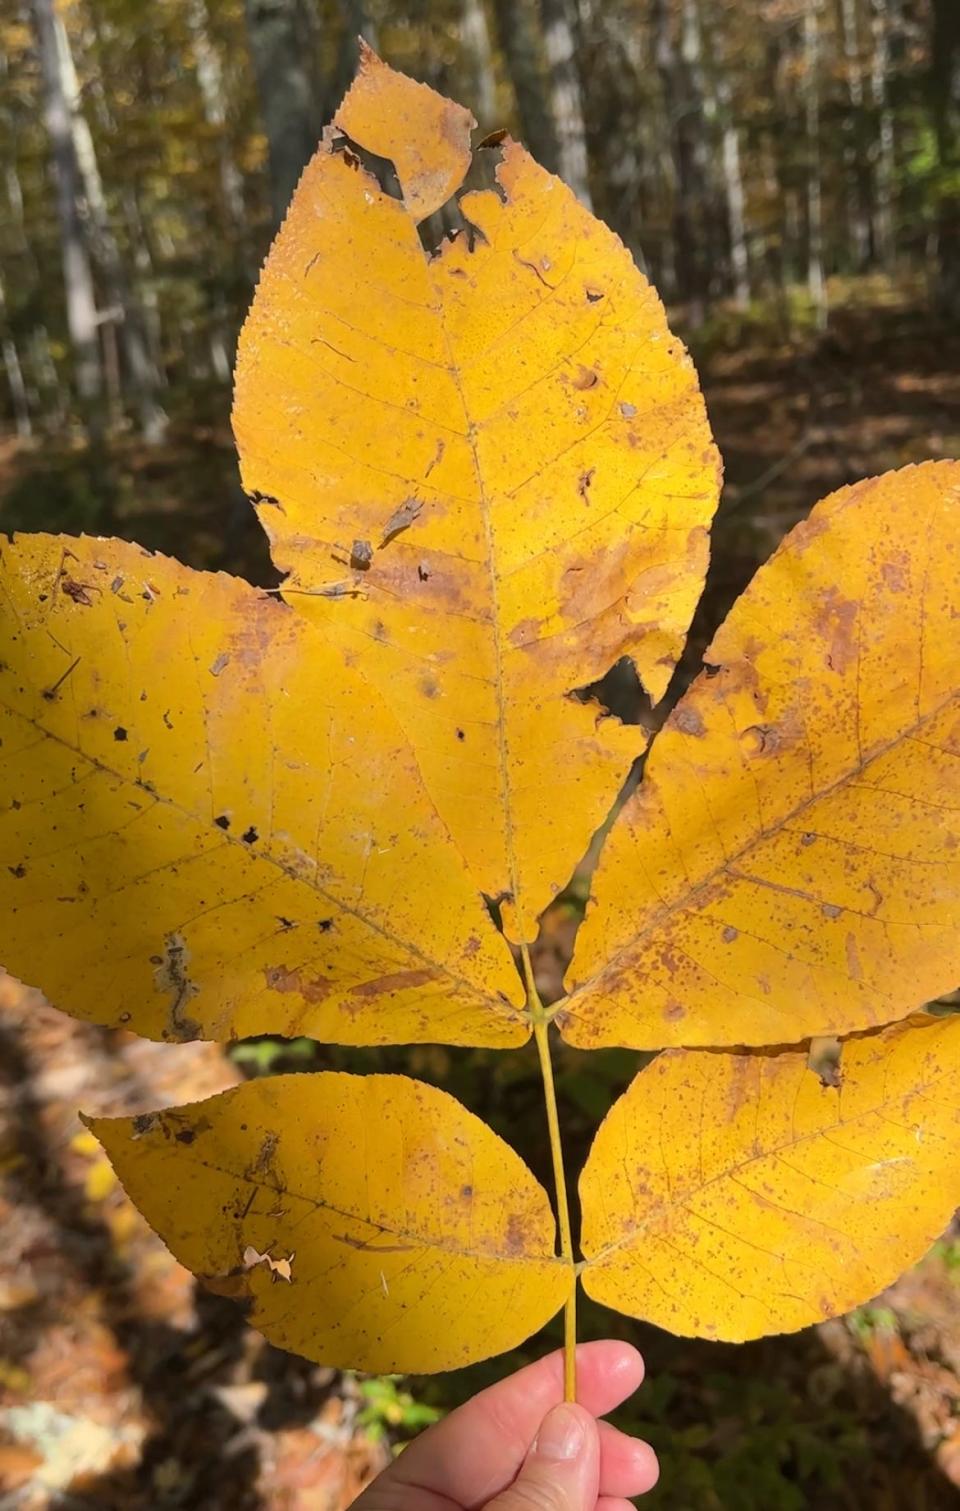 Leaves of a shagbark hickory tree turn gold in the fall.